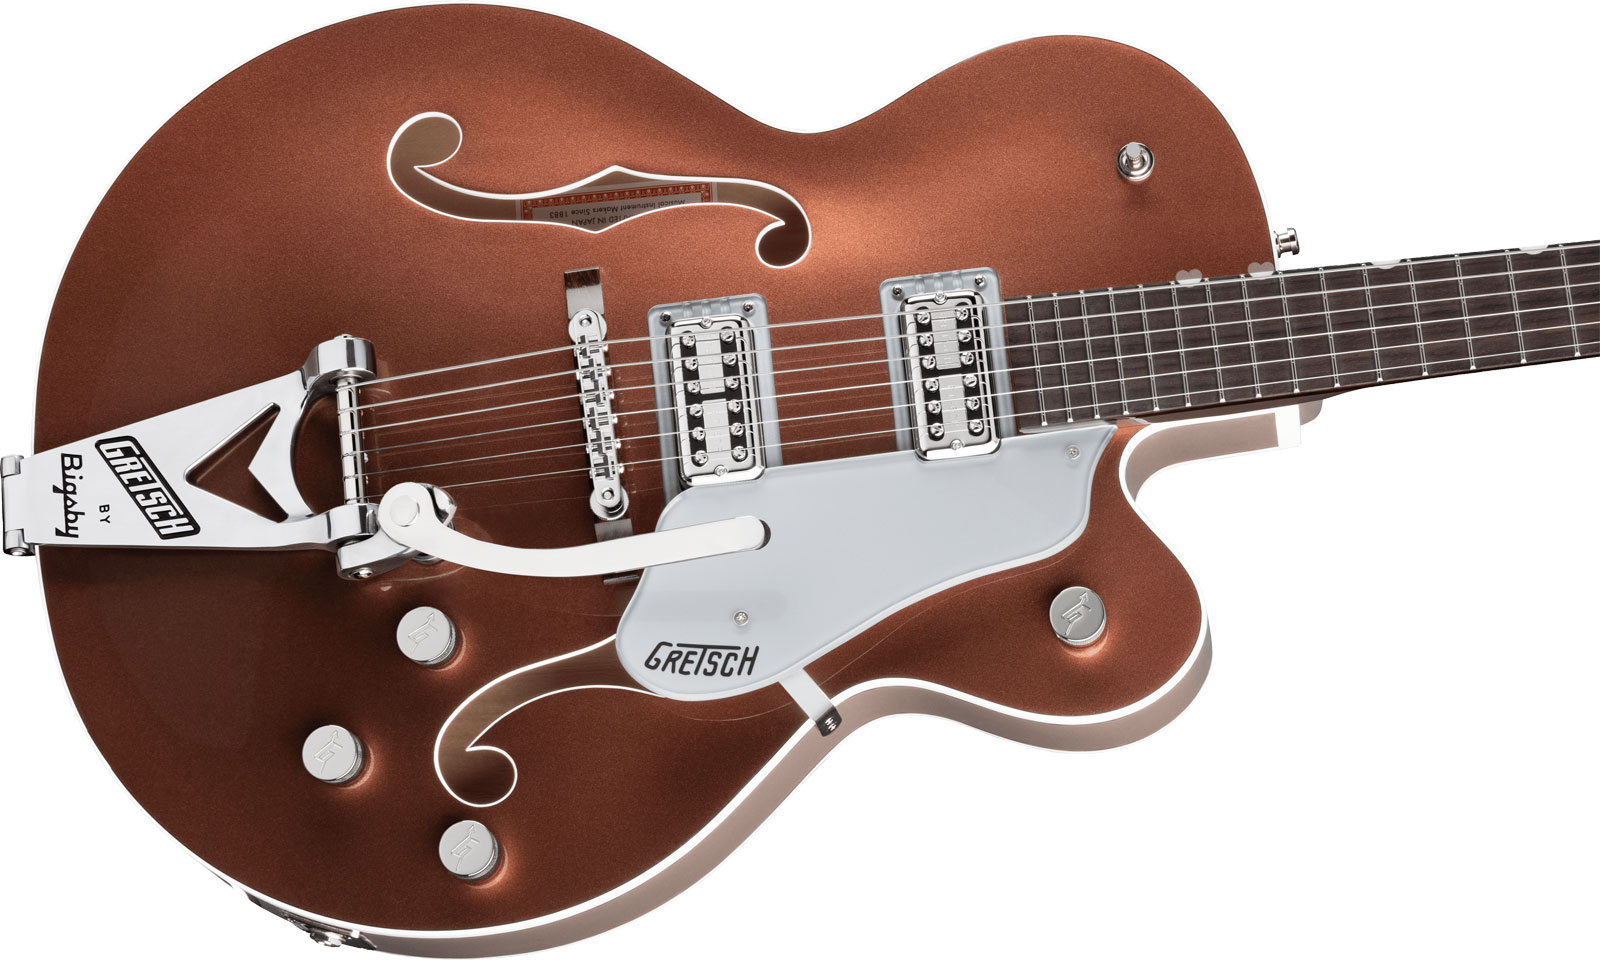 G6118T PLAYERS EDITION ANNIVERSARY HOLLOW BODY WITH STRING-THRU BIGSBY RW, TWO-TONE COPPER METALLIC/